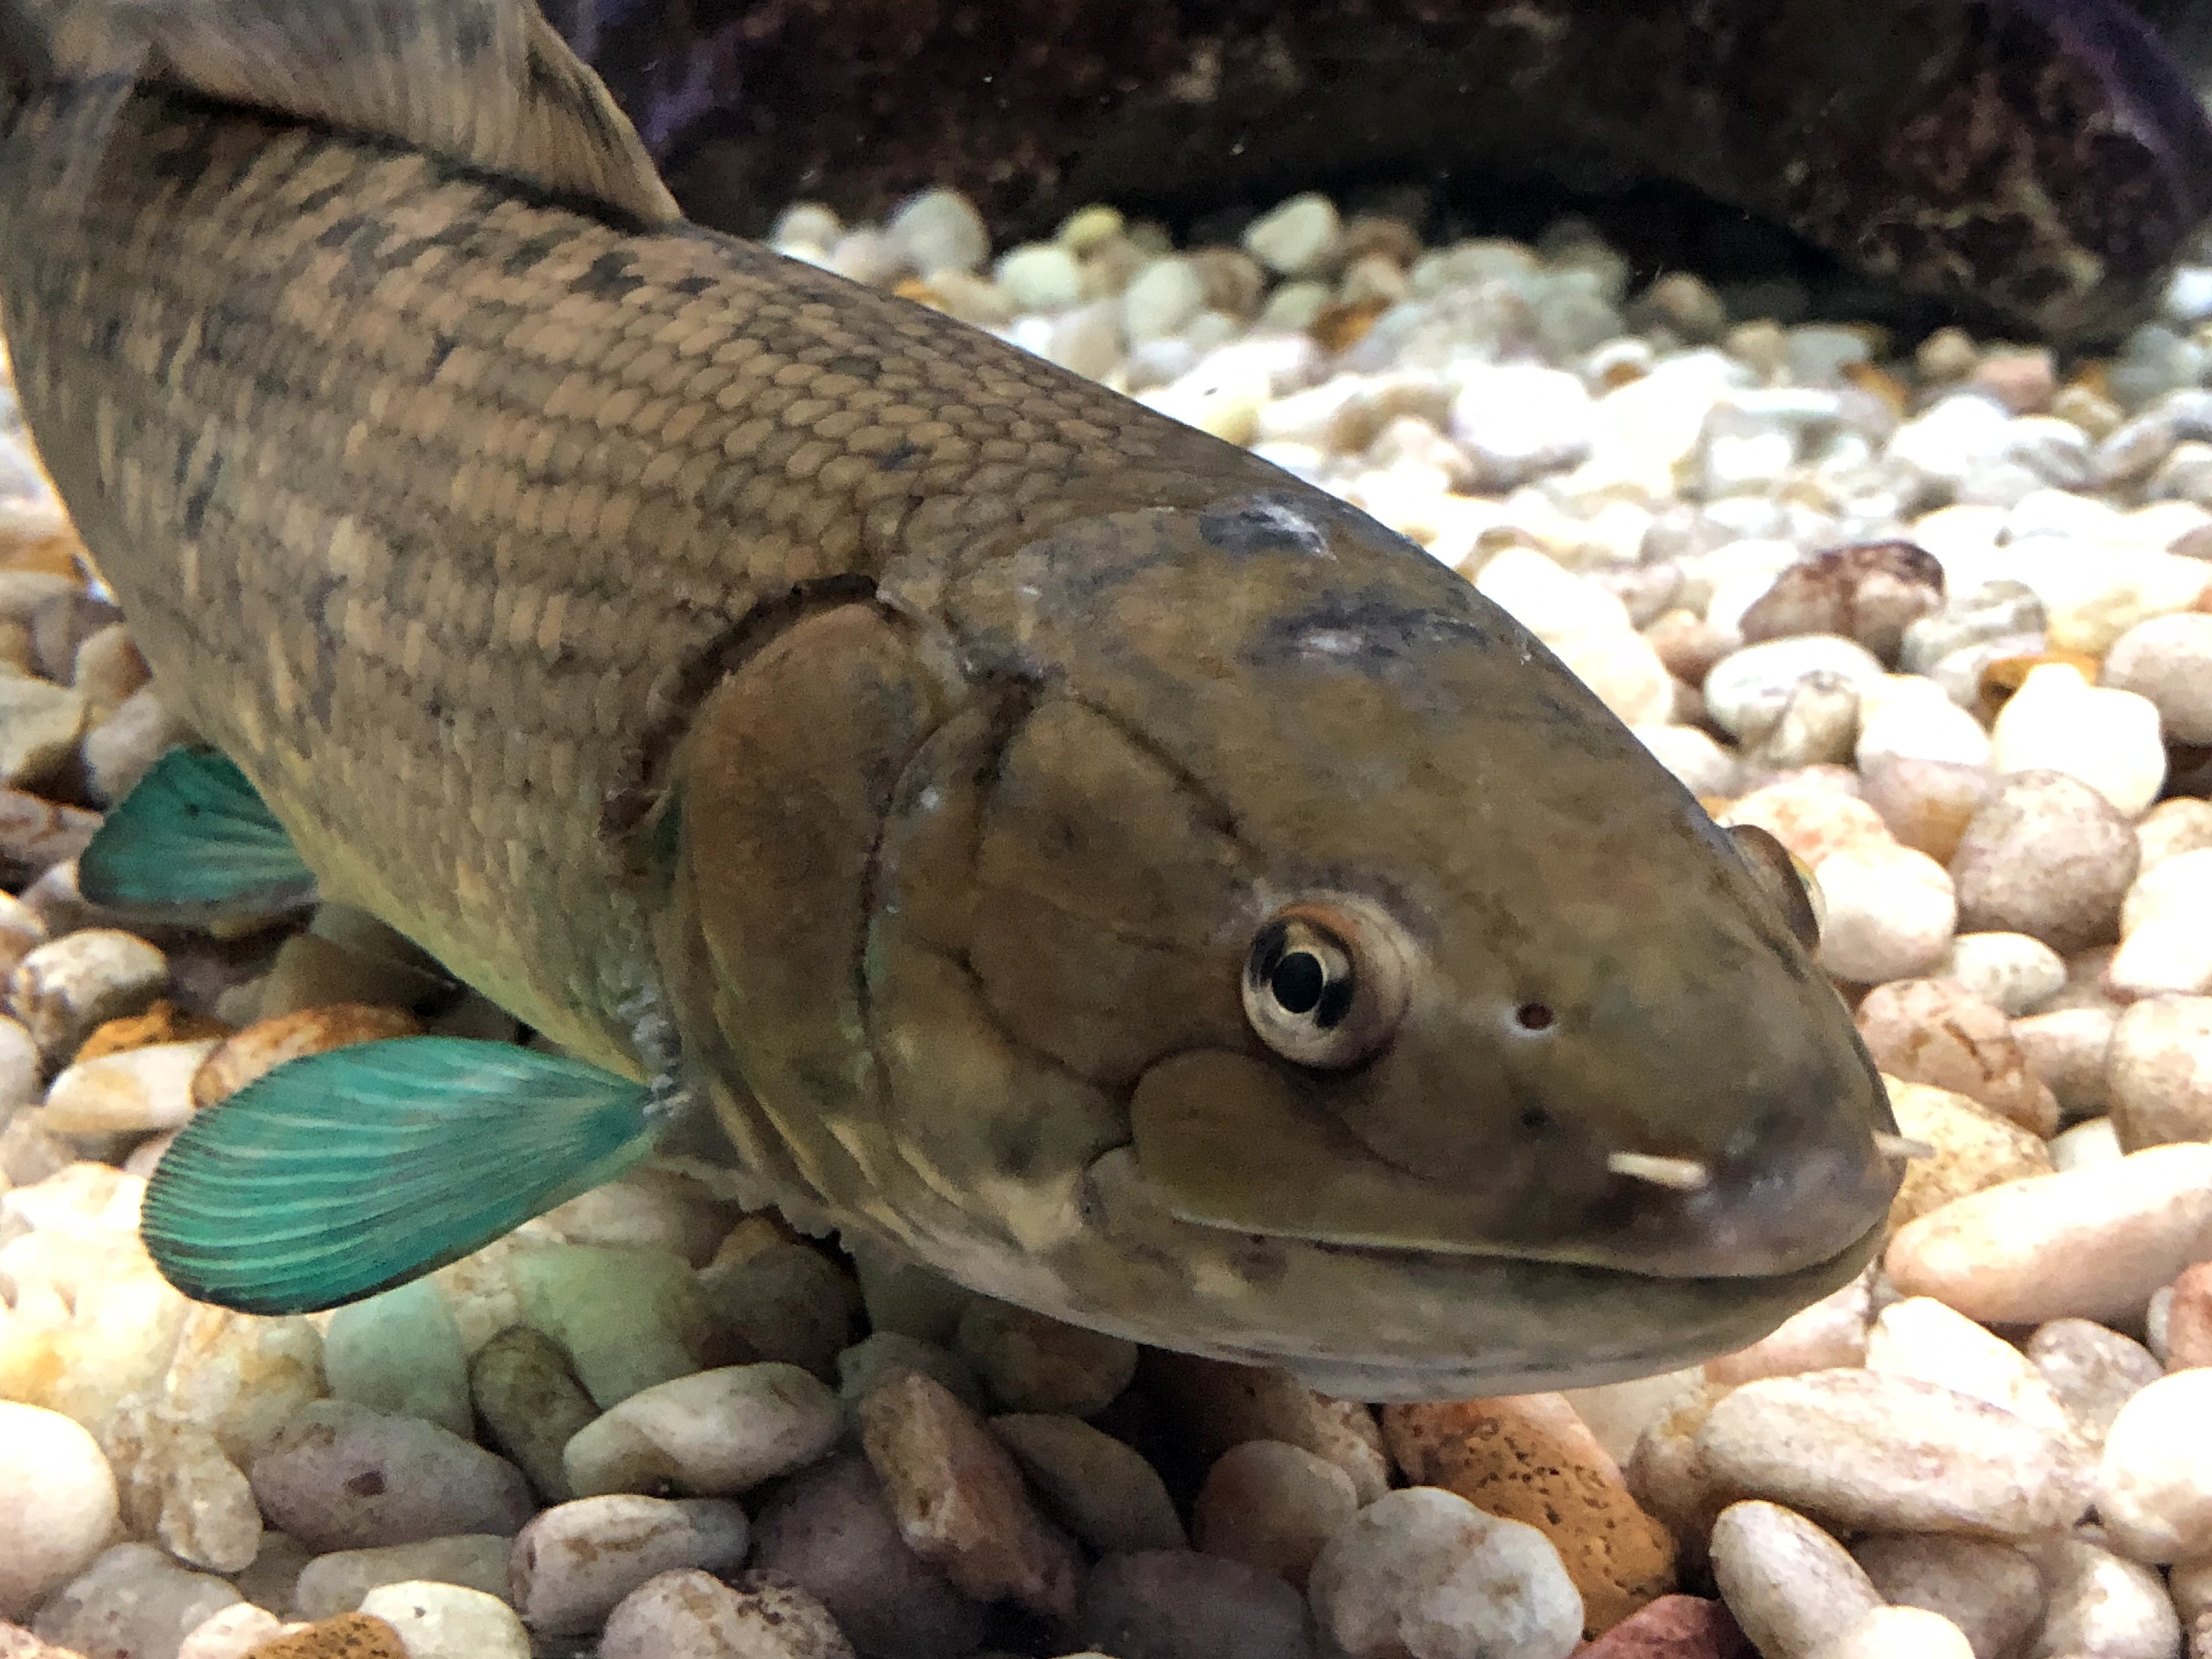  A male bowfin swims underwater above light-colored rocks, grinning for the camera. The fish is an earthy brown, except for its bright green fins.